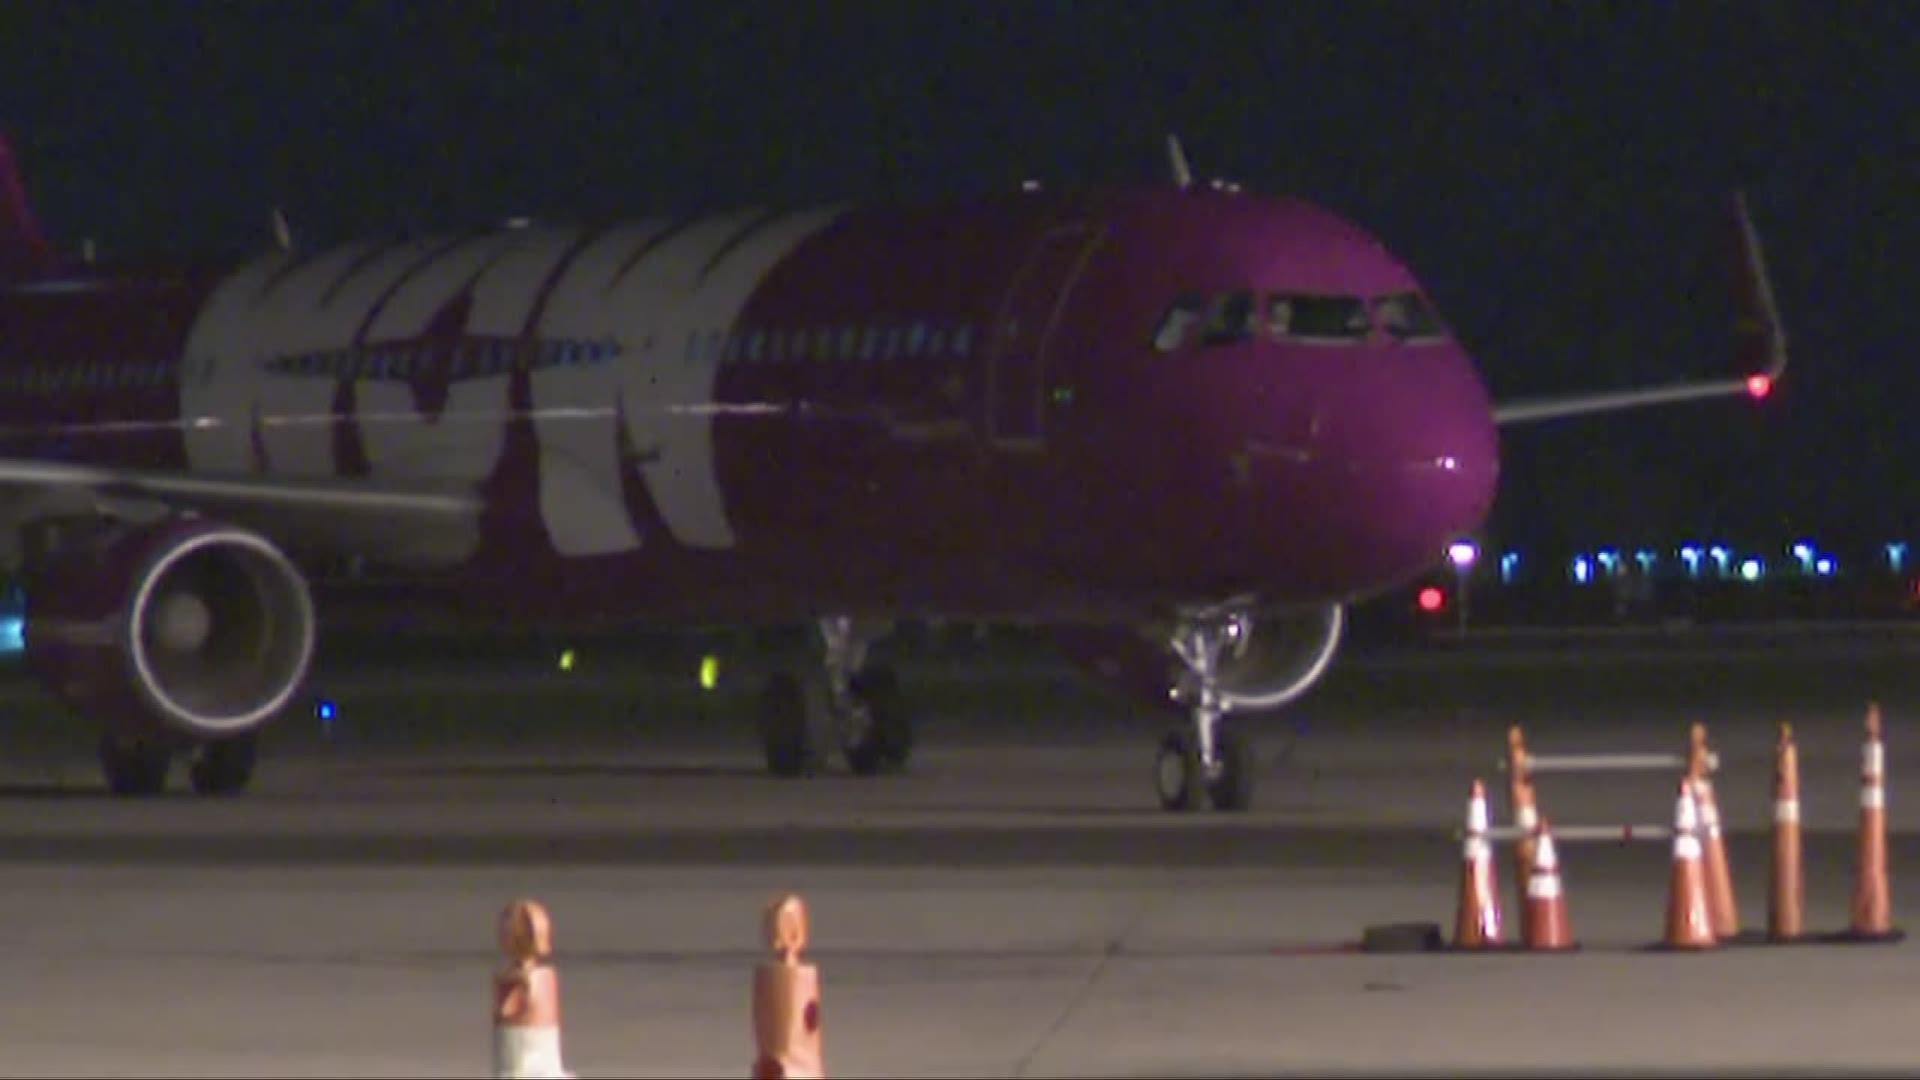 May 4, 2018: WOW air has taken off at CLE with flights to Iceland.